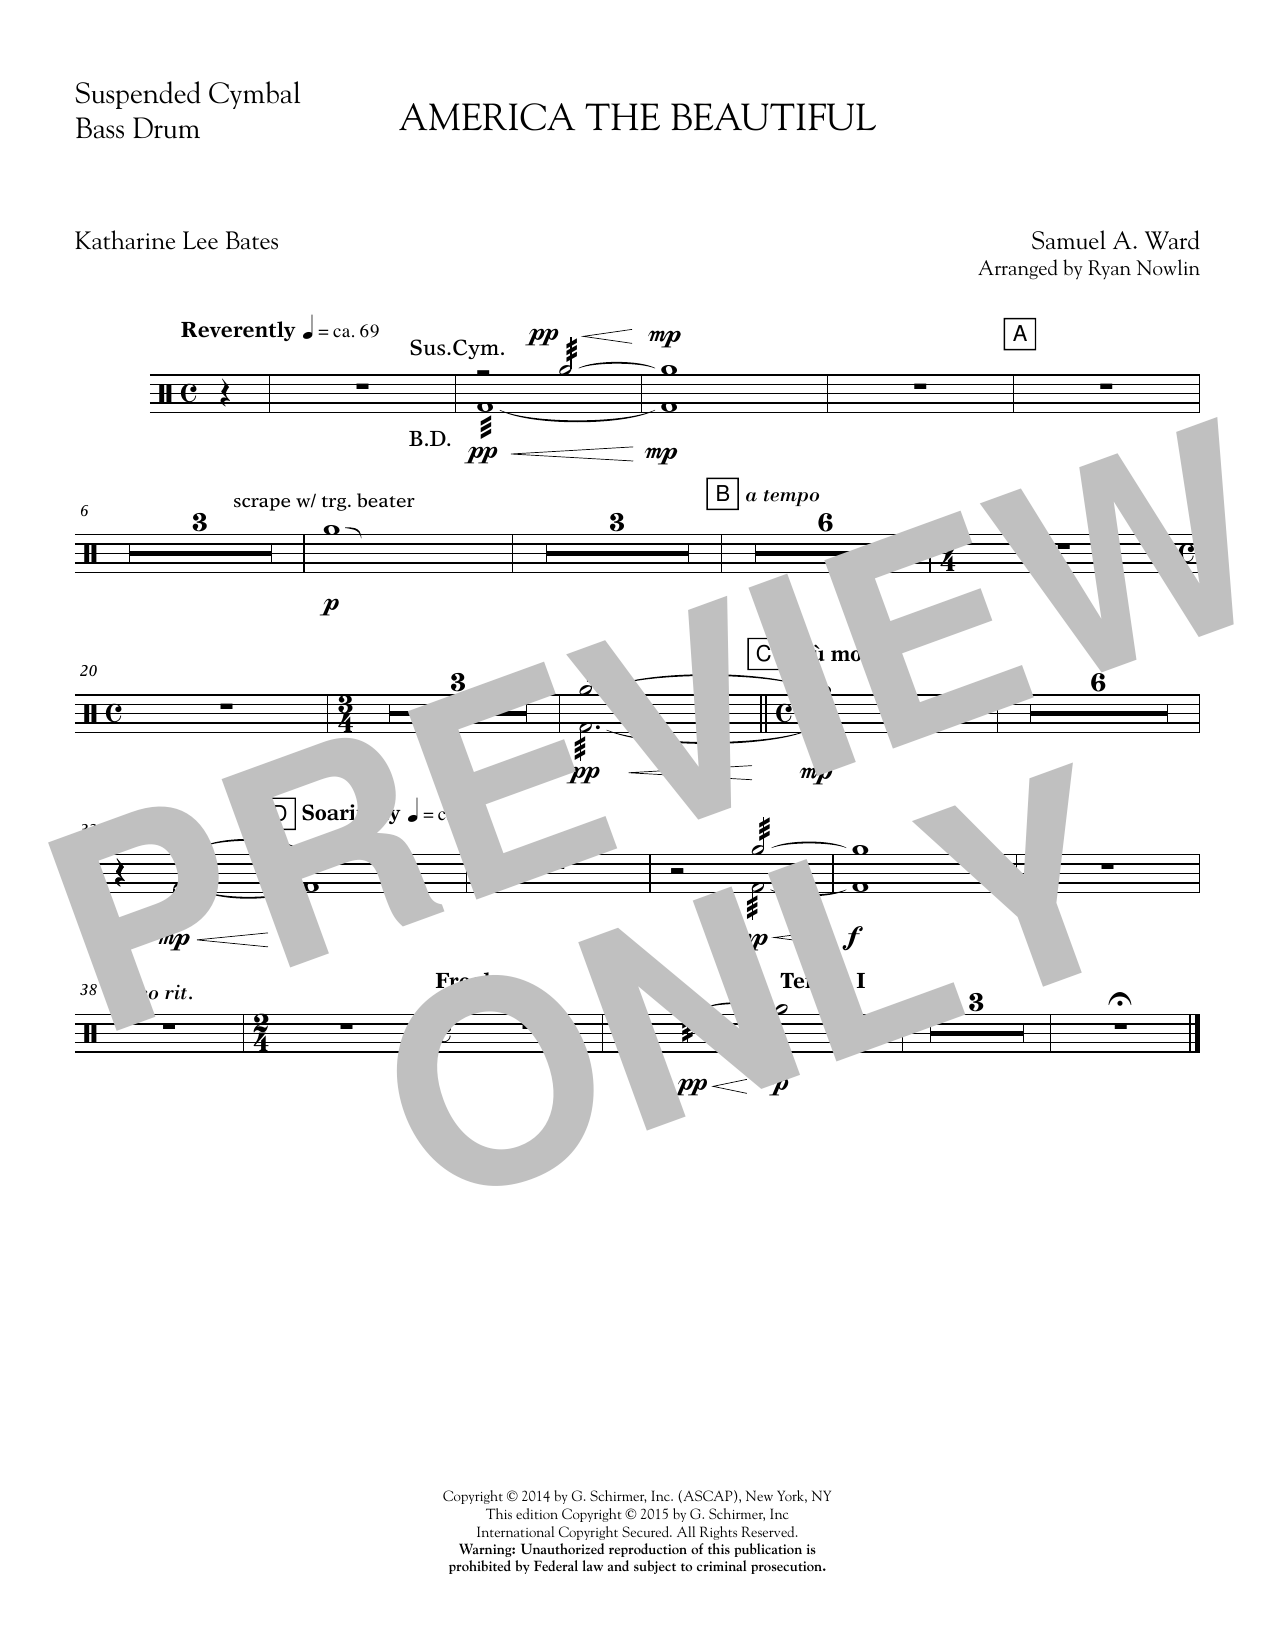 Ryan Nowlin America, the Beautiful - Bass Drum/ Susp. Cymbal sheet music notes and chords. Download Printable PDF.